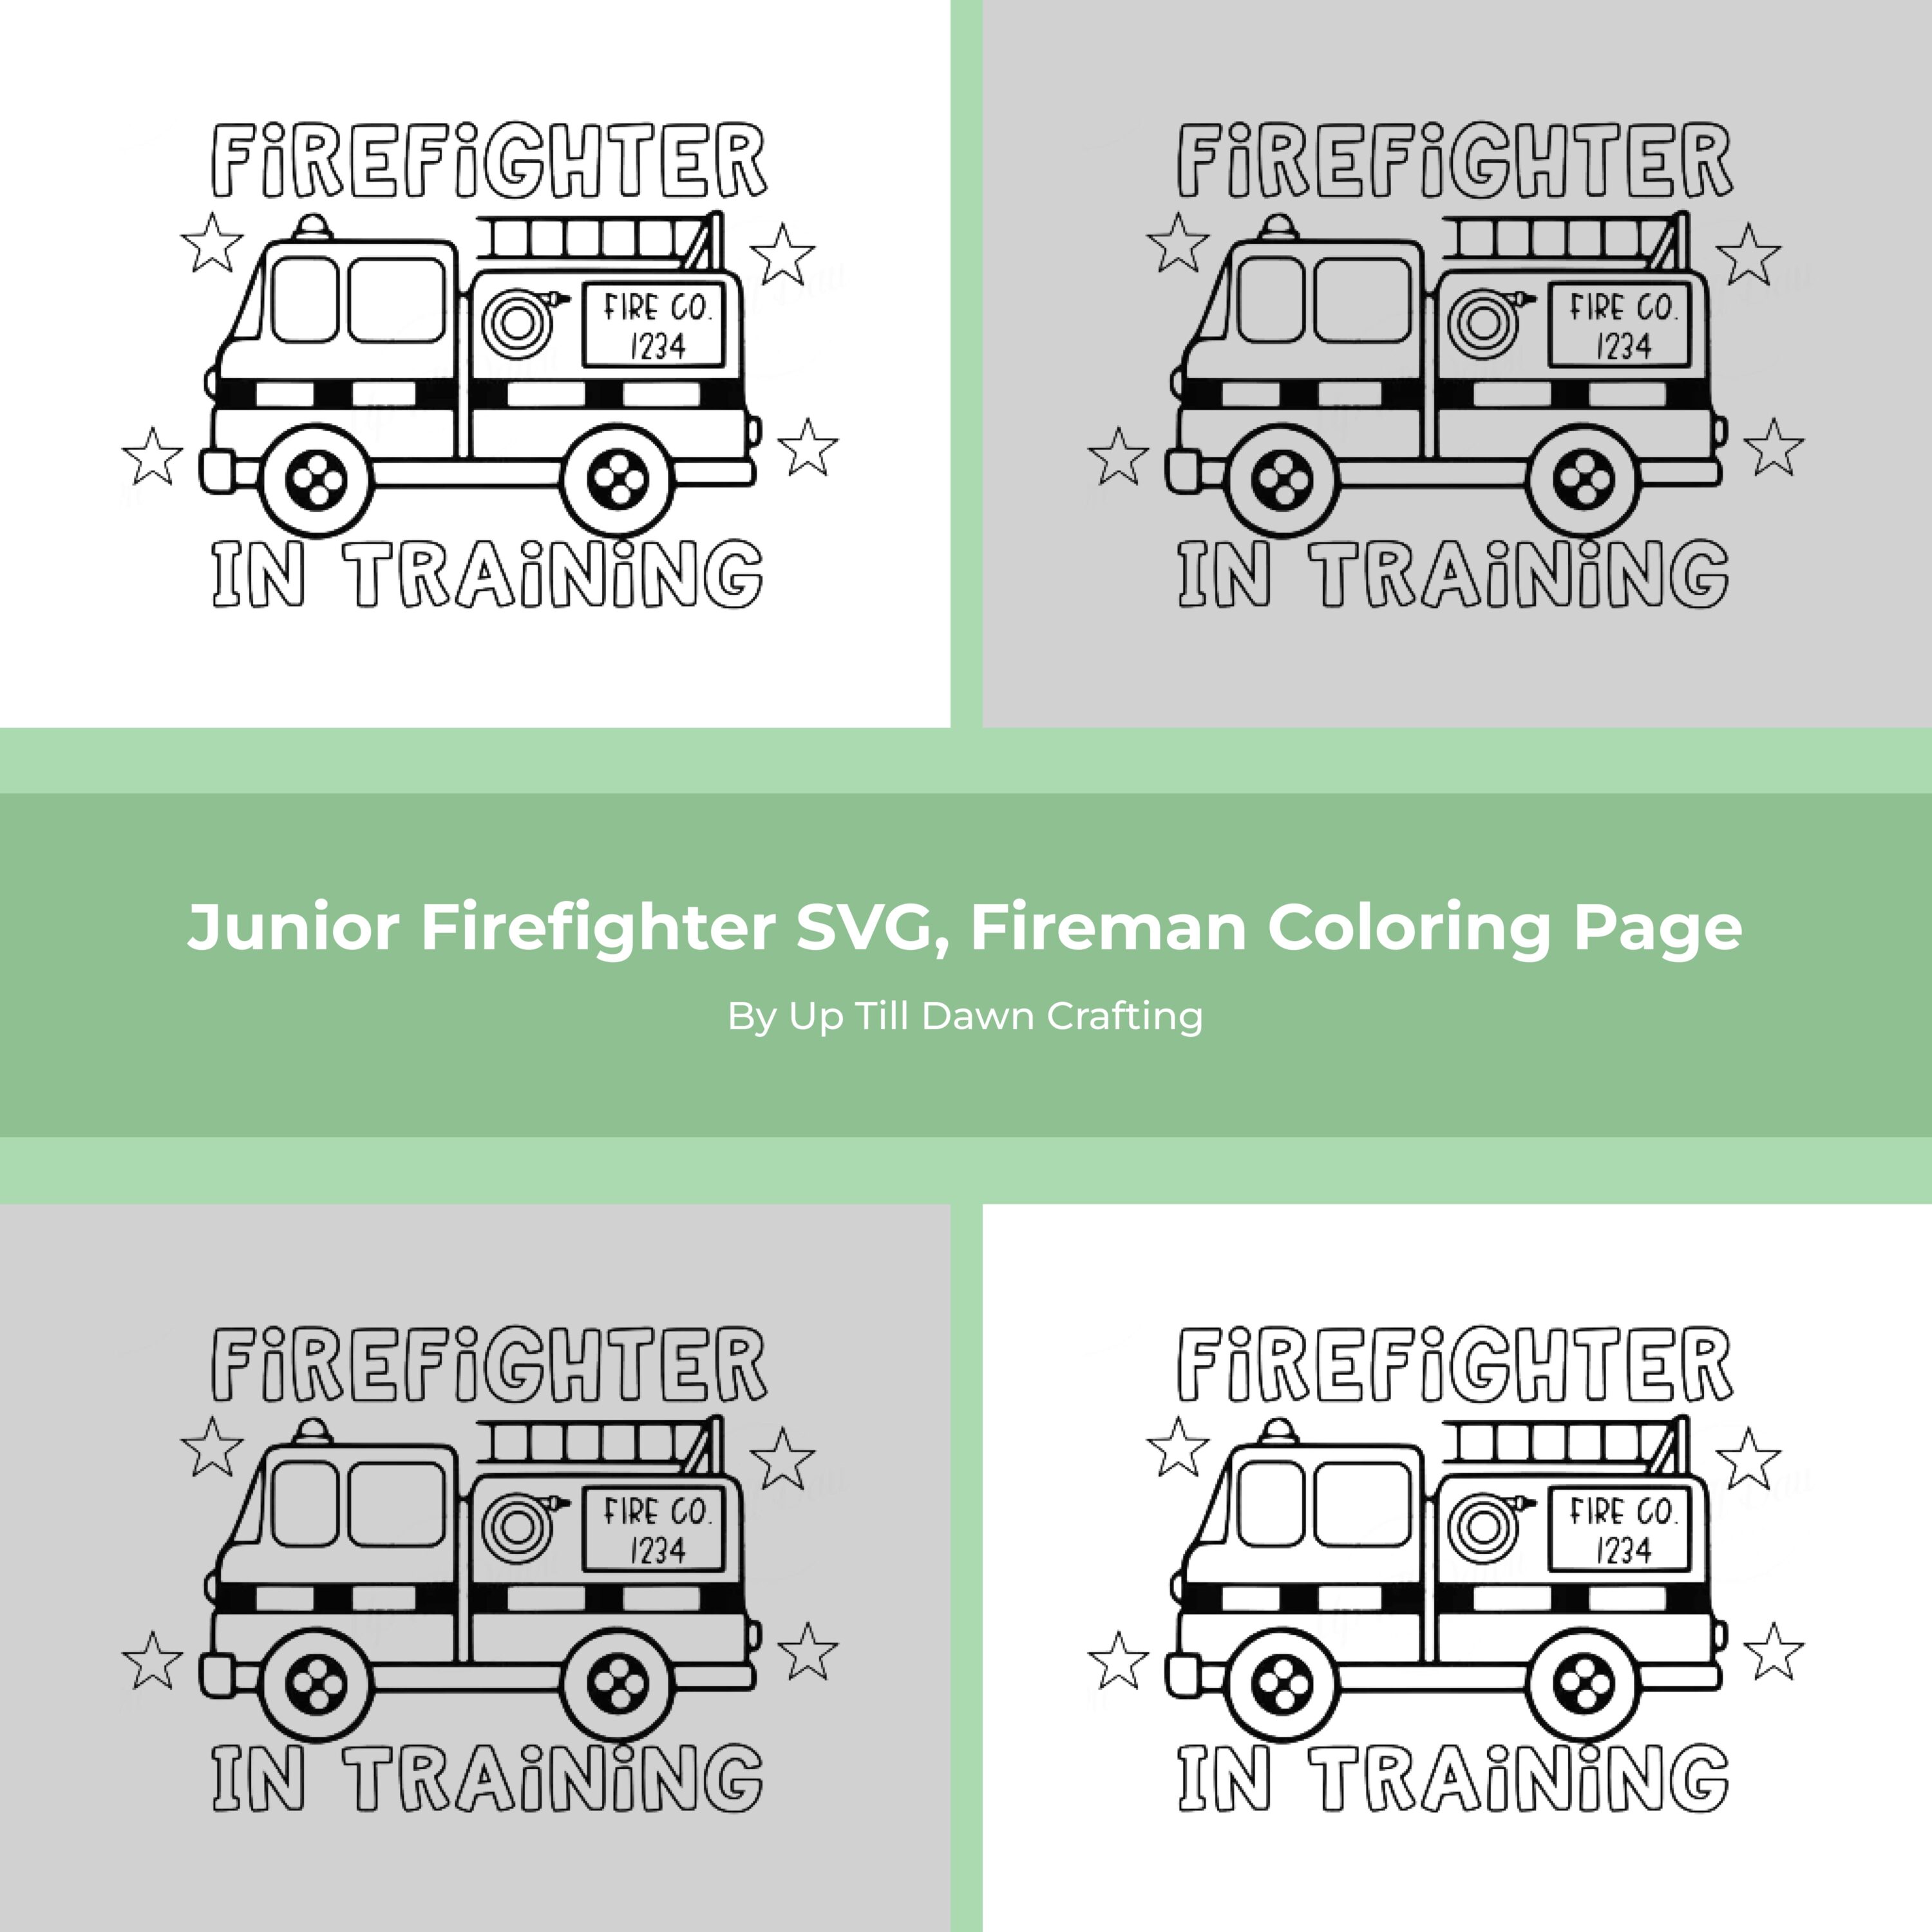 Junior Firefighter SVG - main image preview.